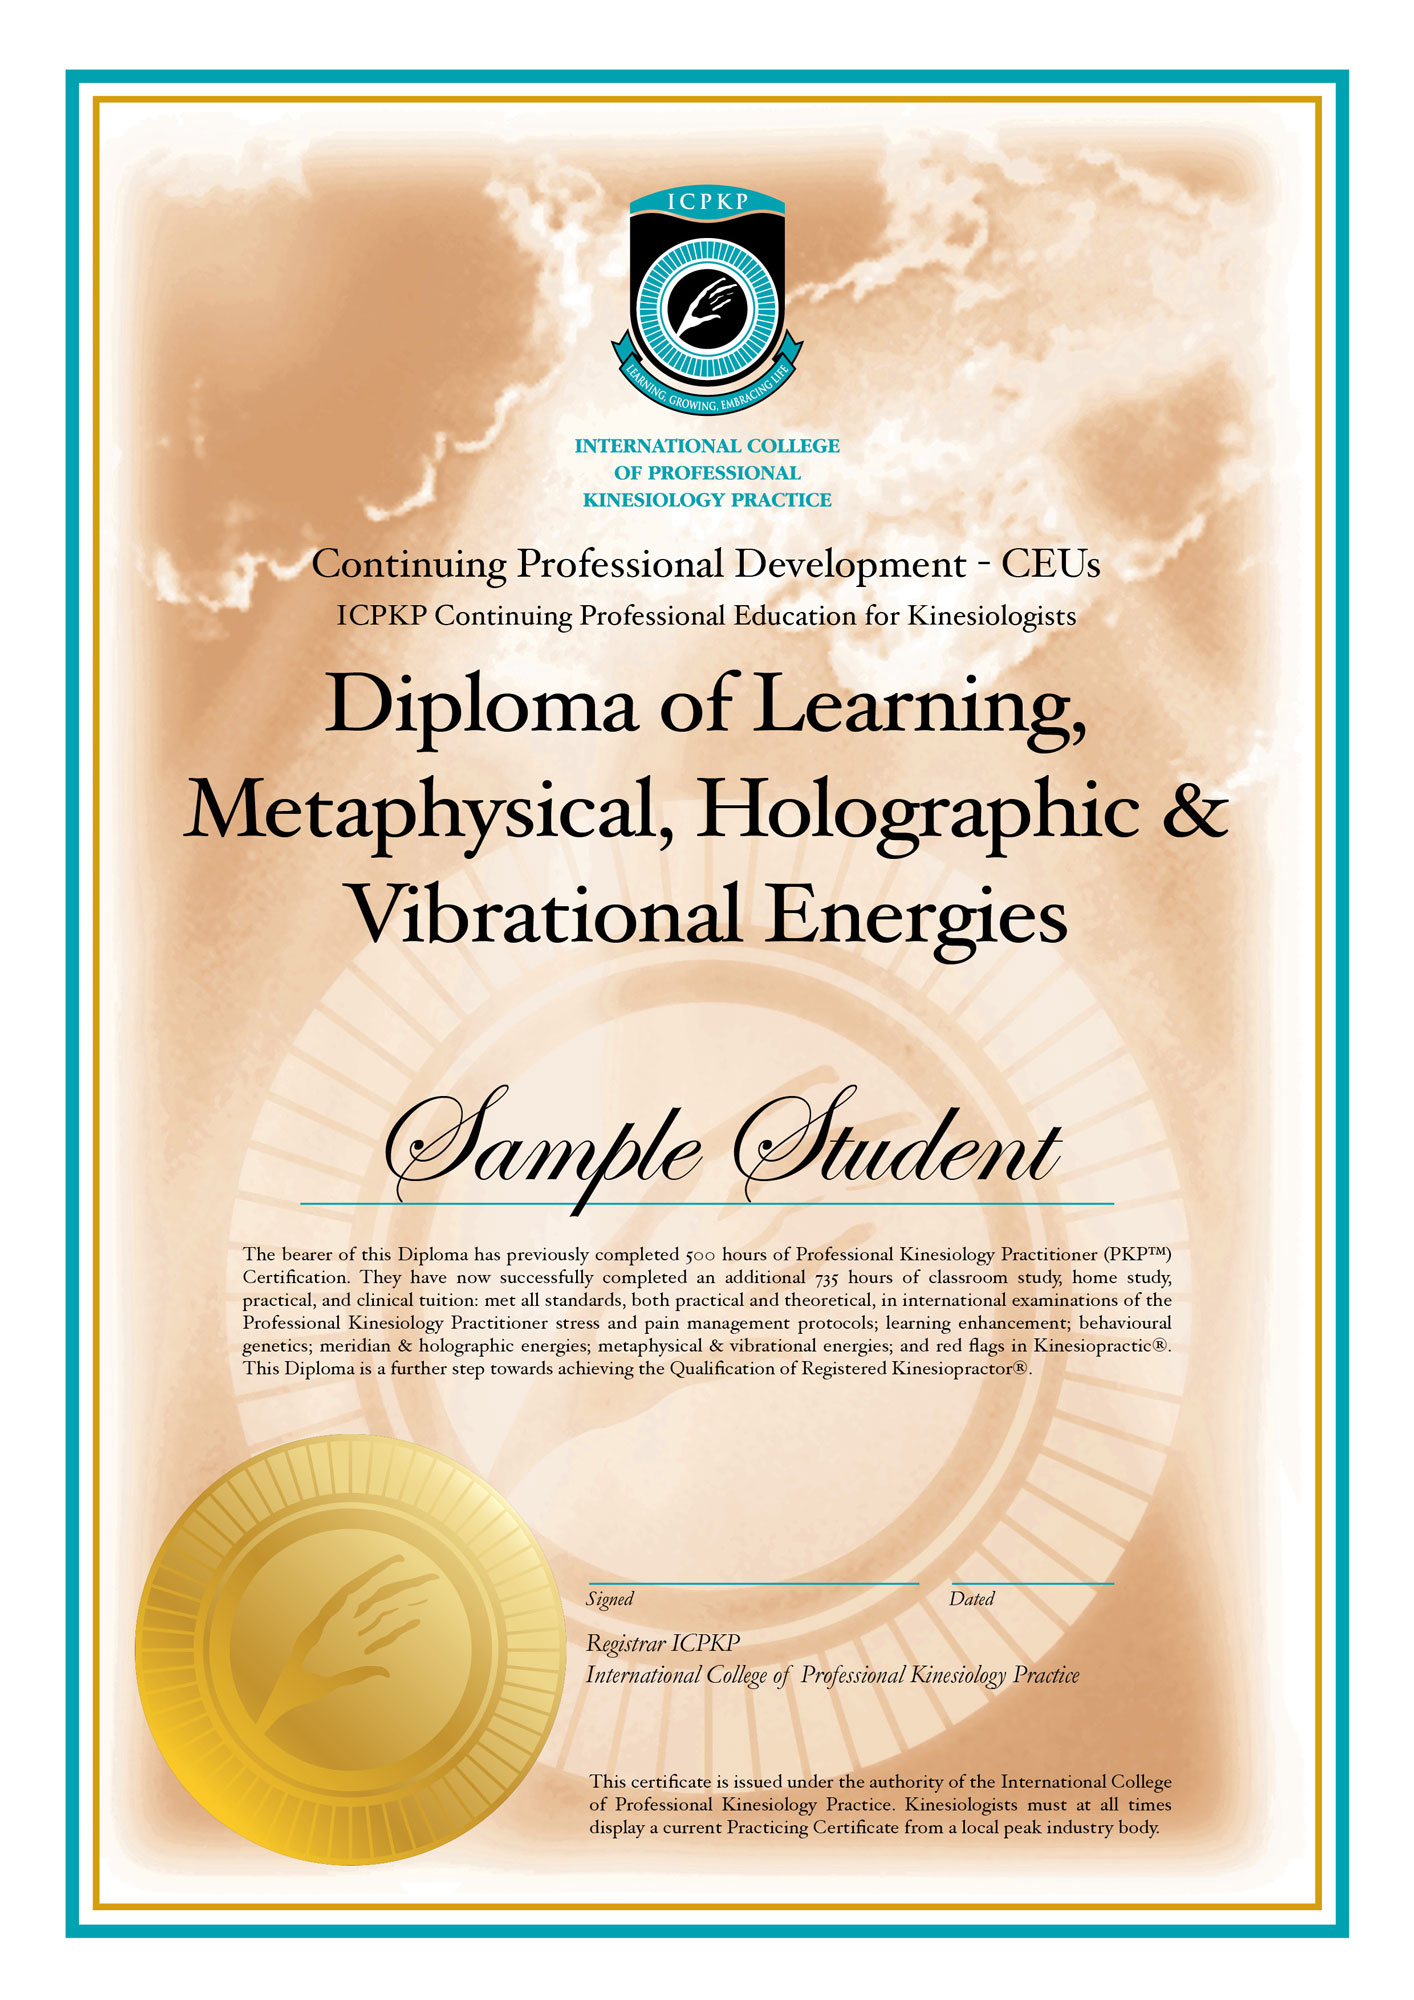 Diploma of Learning, Metaphysical, Holographic & Vibrational Energies certificate